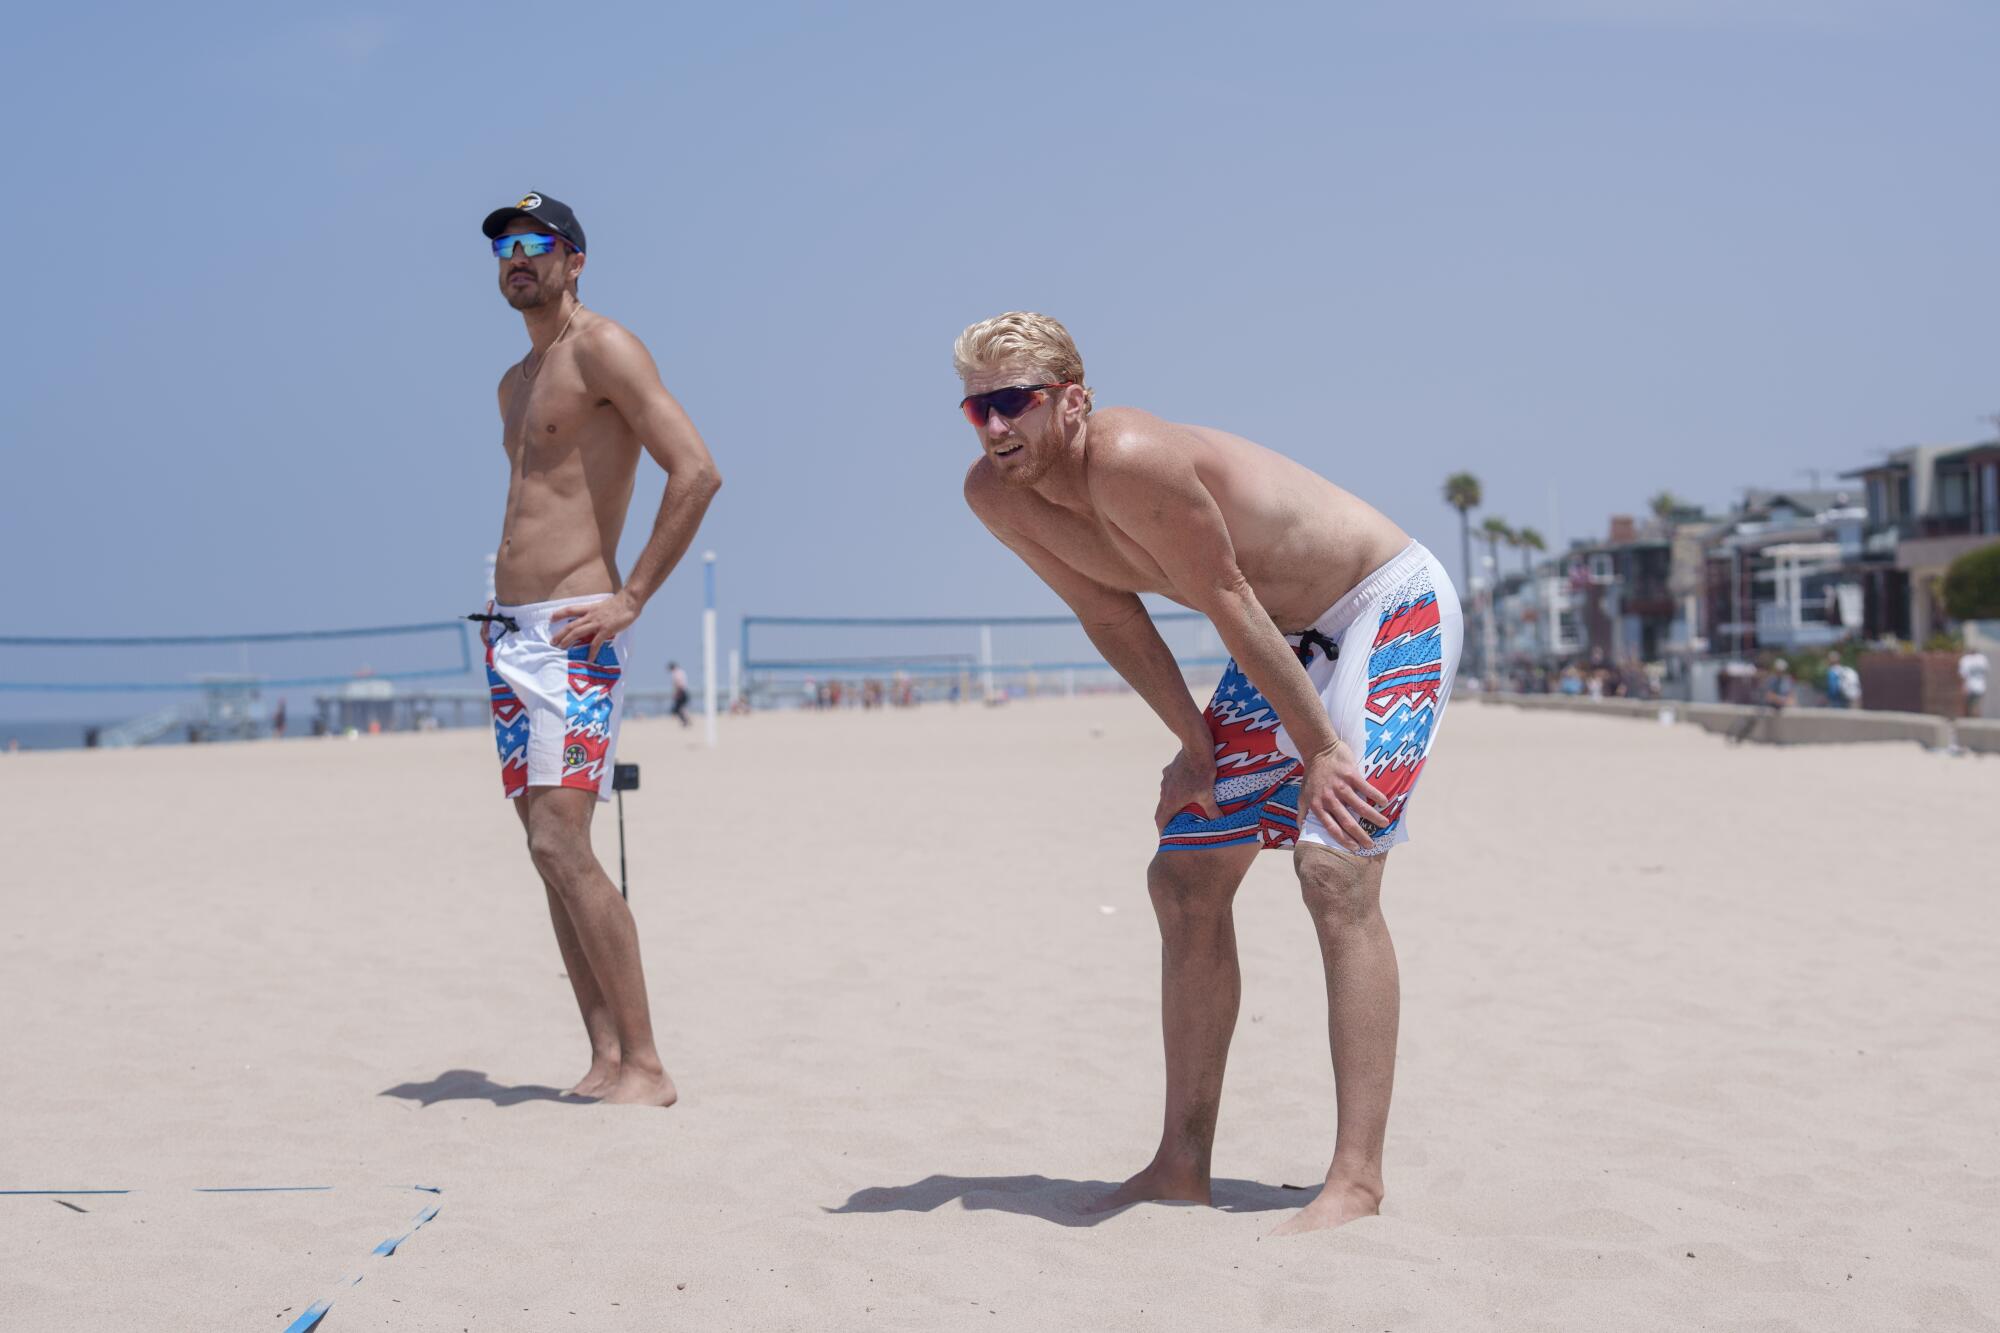 For Miles Evans, left, and Chase Budinger, taking part in a training session in Hermosa Beach.